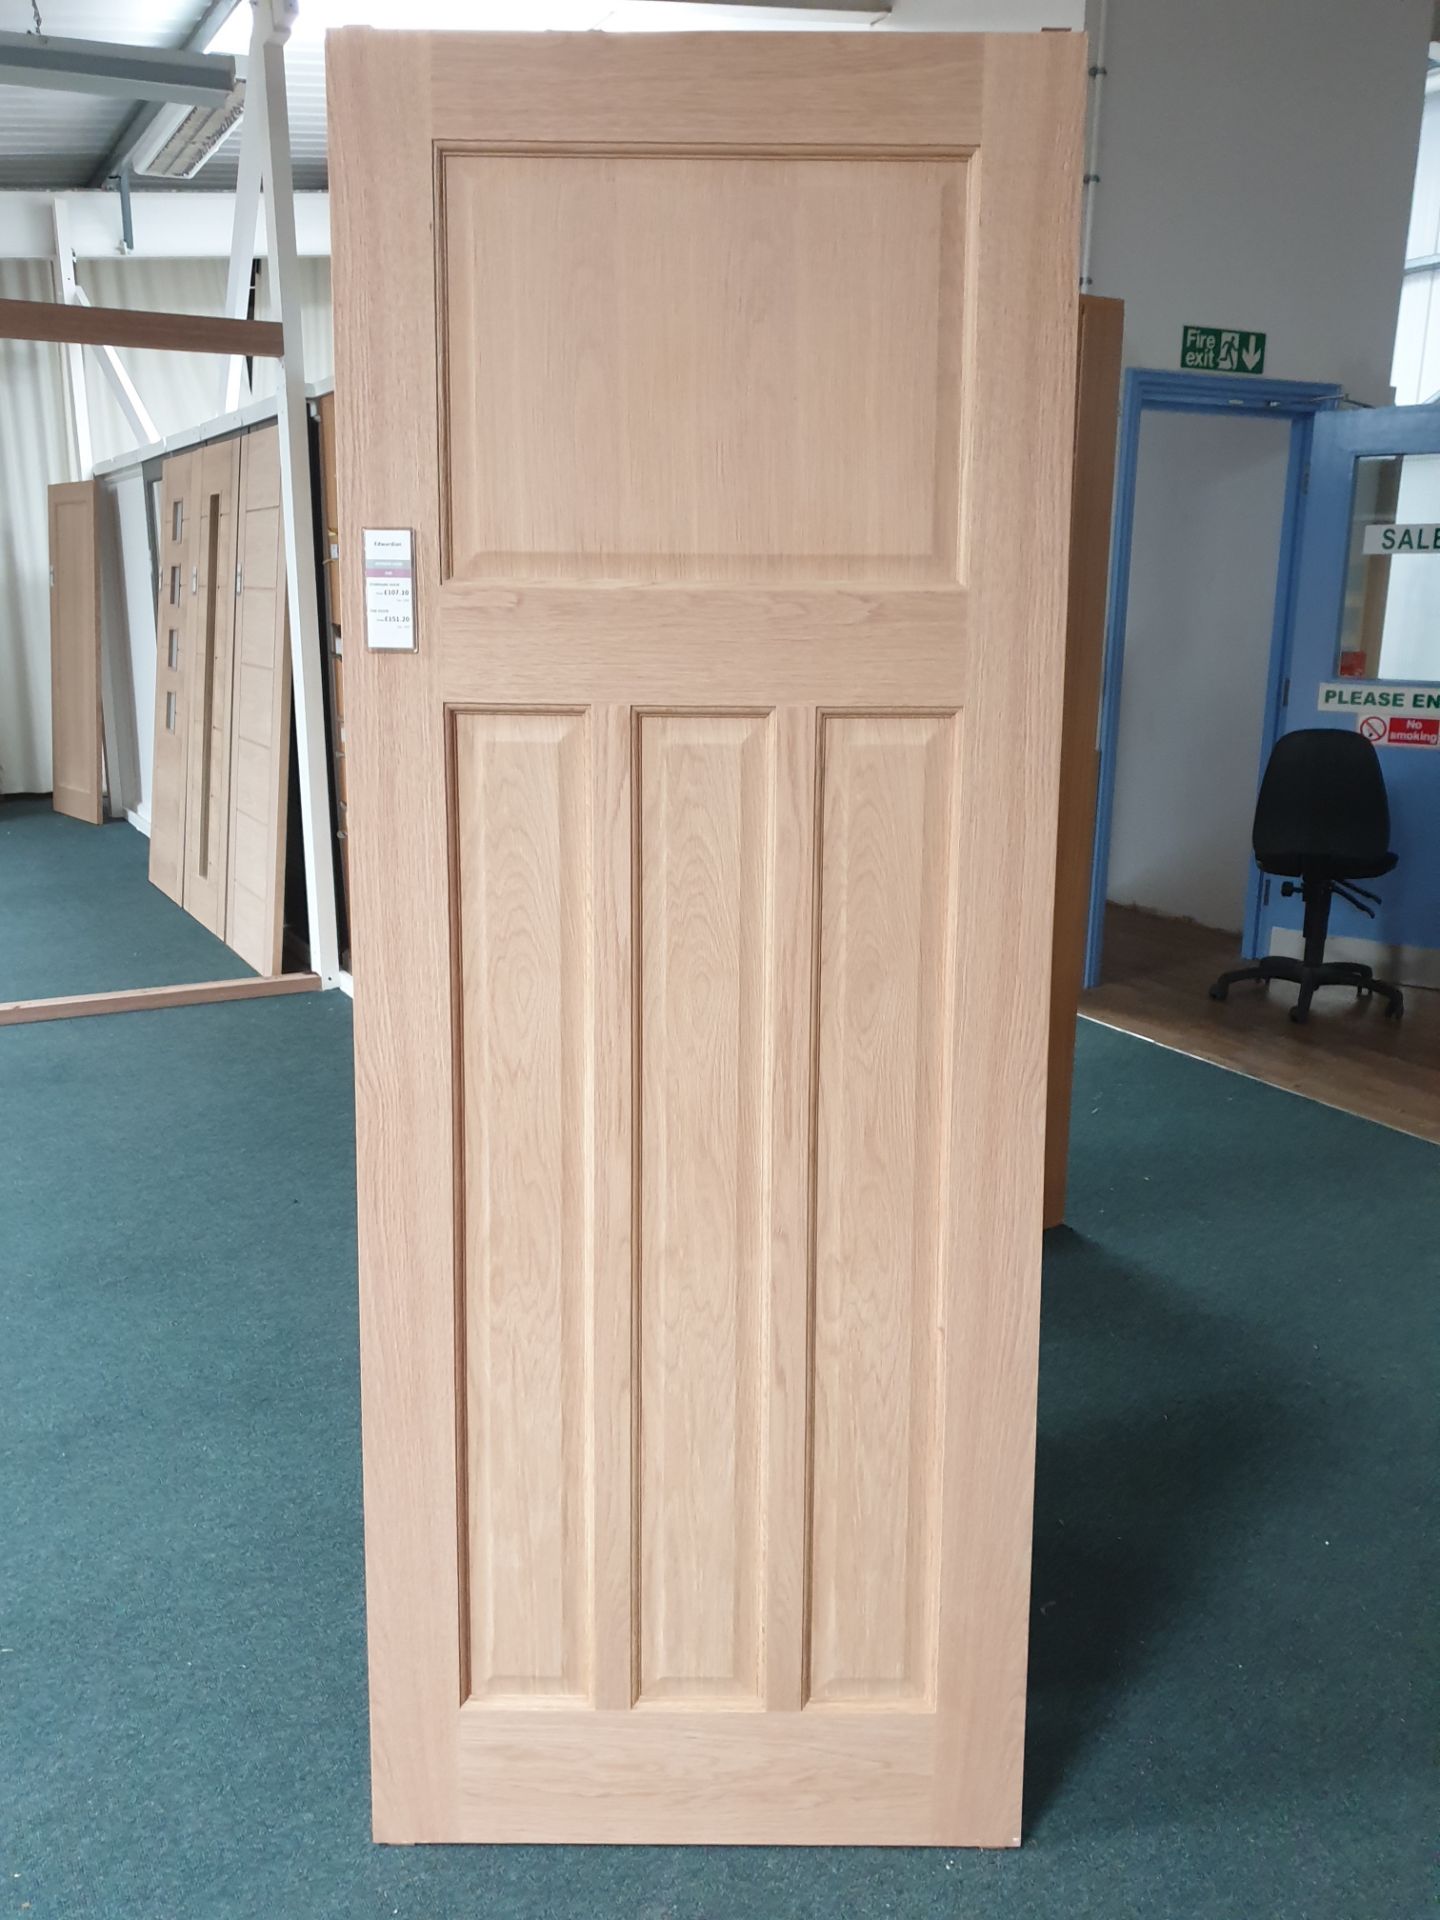 4 x Edwardian 4 Panel Internal Fire Door AW0EDWFD33 78”x33”x44mm - Lots to be handed out in order